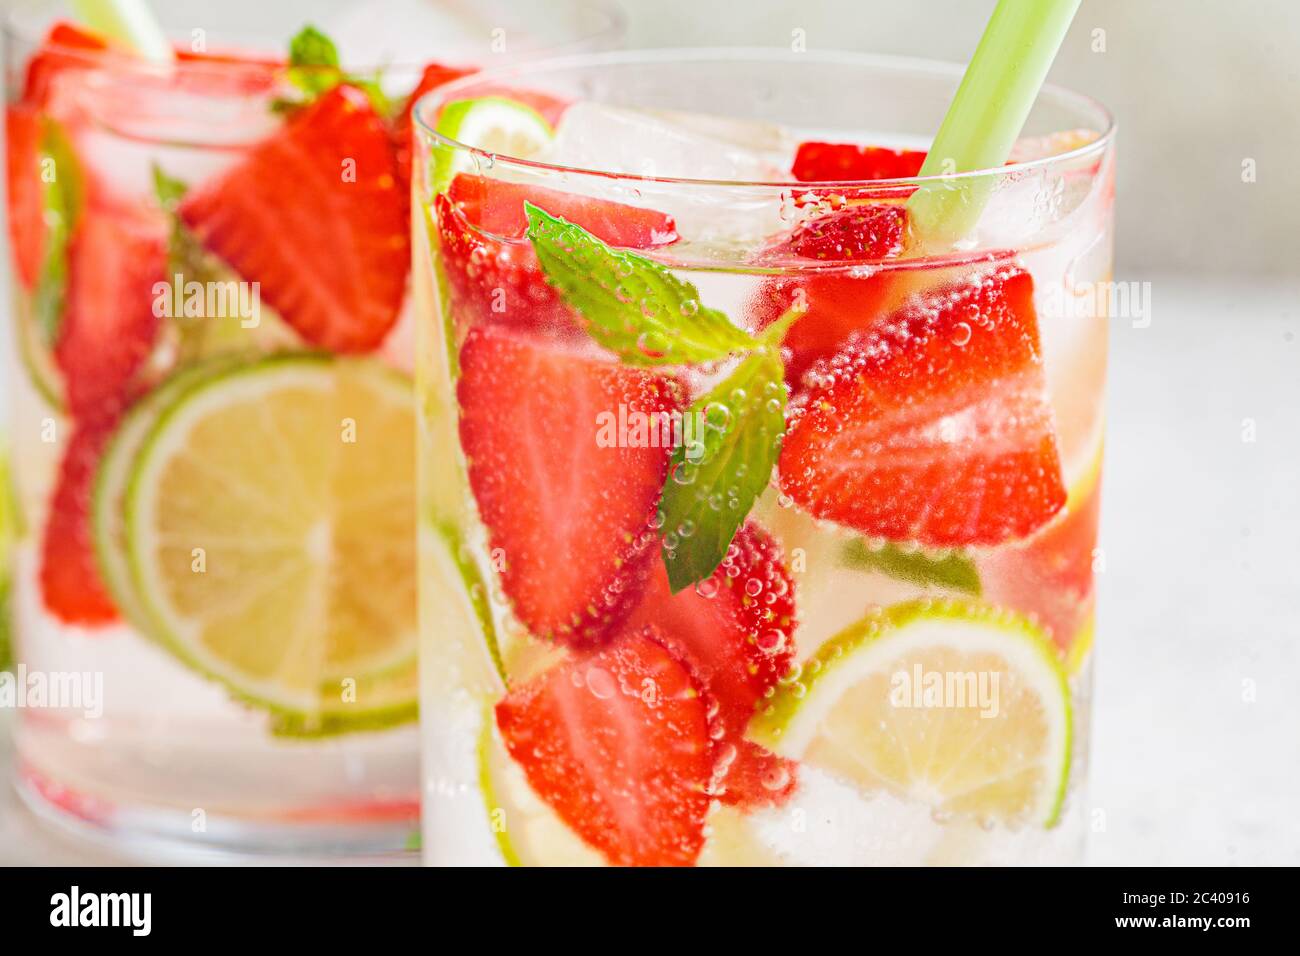 Detox sassy water with strawberry and lime in glasses. Healthy eating concept. Stock Photo